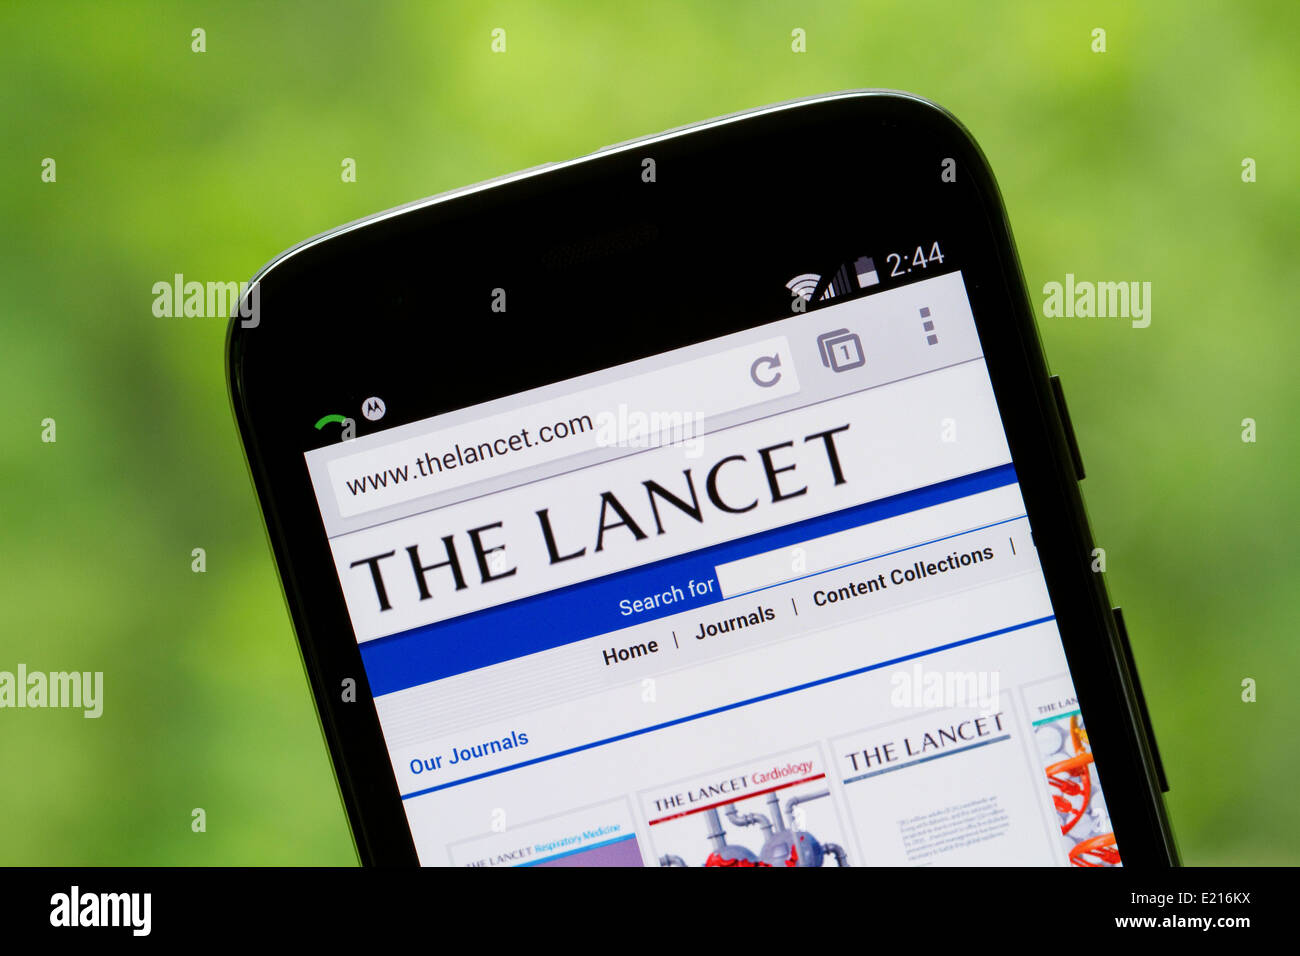 The Lancet website displayed on the screen of a Motorola, Moto G cellphone, mobile phone. Stock Photo